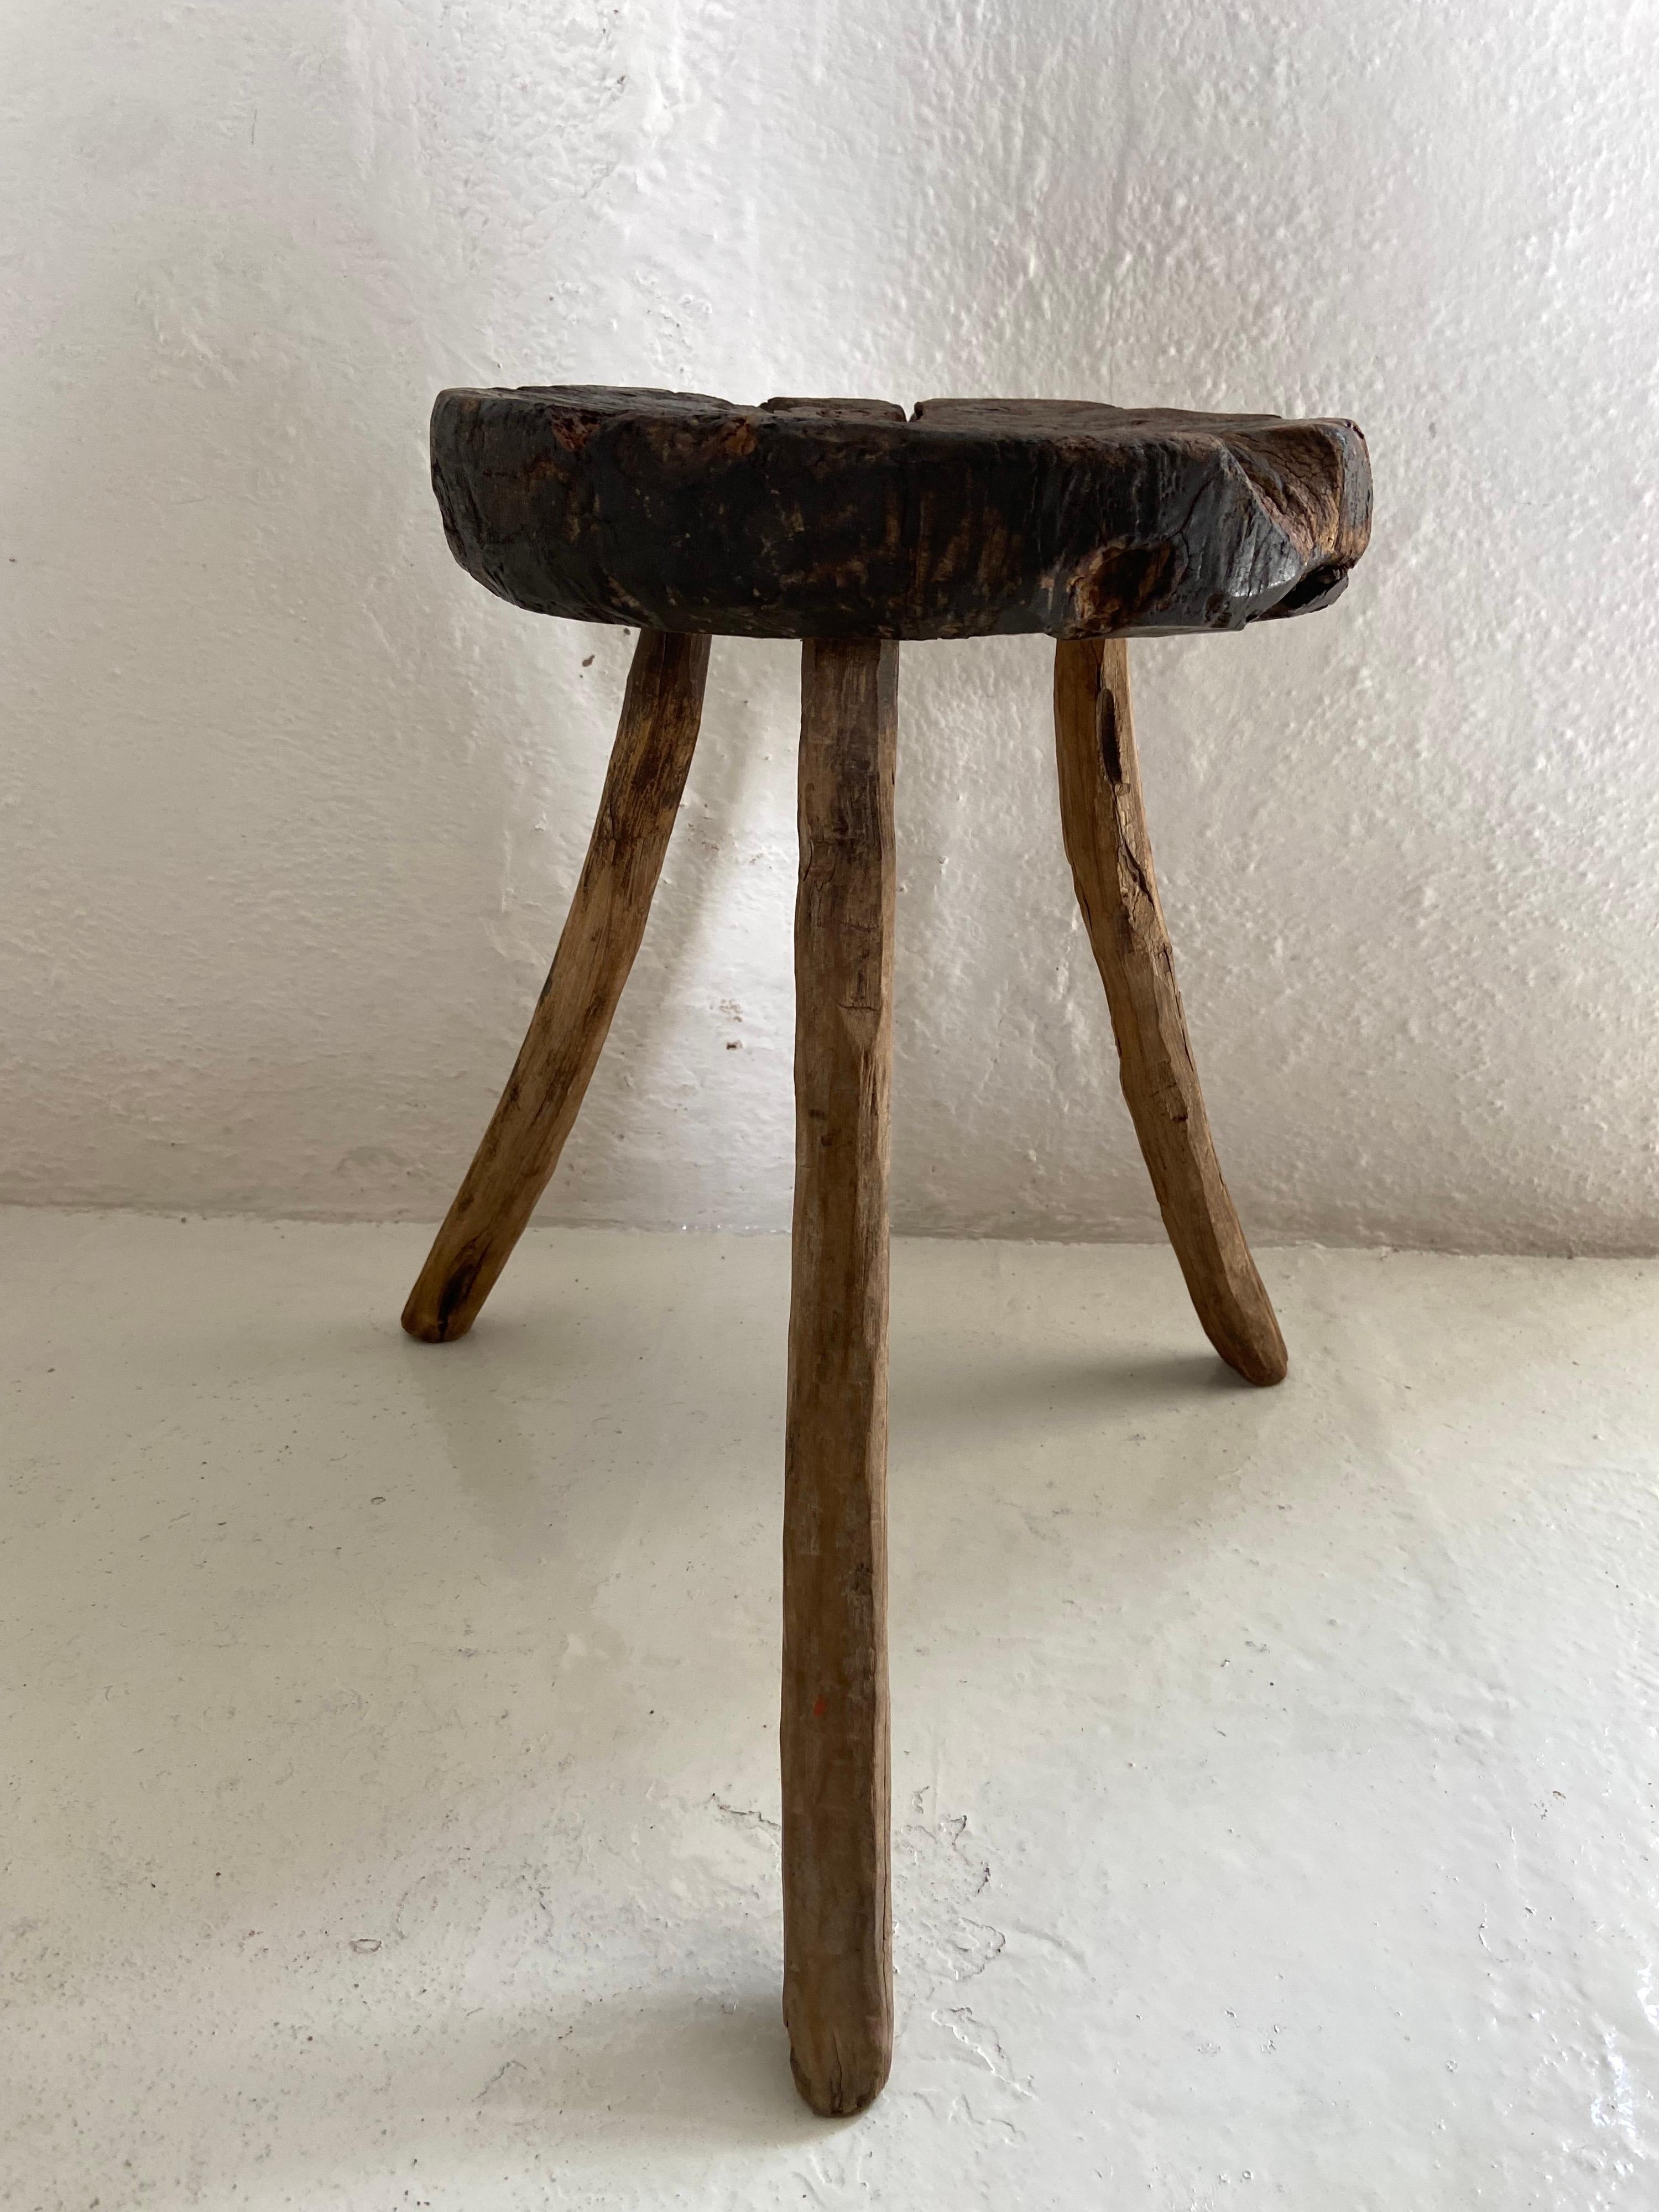 19th century mesquite hardwood stool from Mexico. All original legs. This piece shows much wear with an unusually dark, weathered seat from years of use. Completely primitive in style. The stool was acquired from San Luis Potosí.